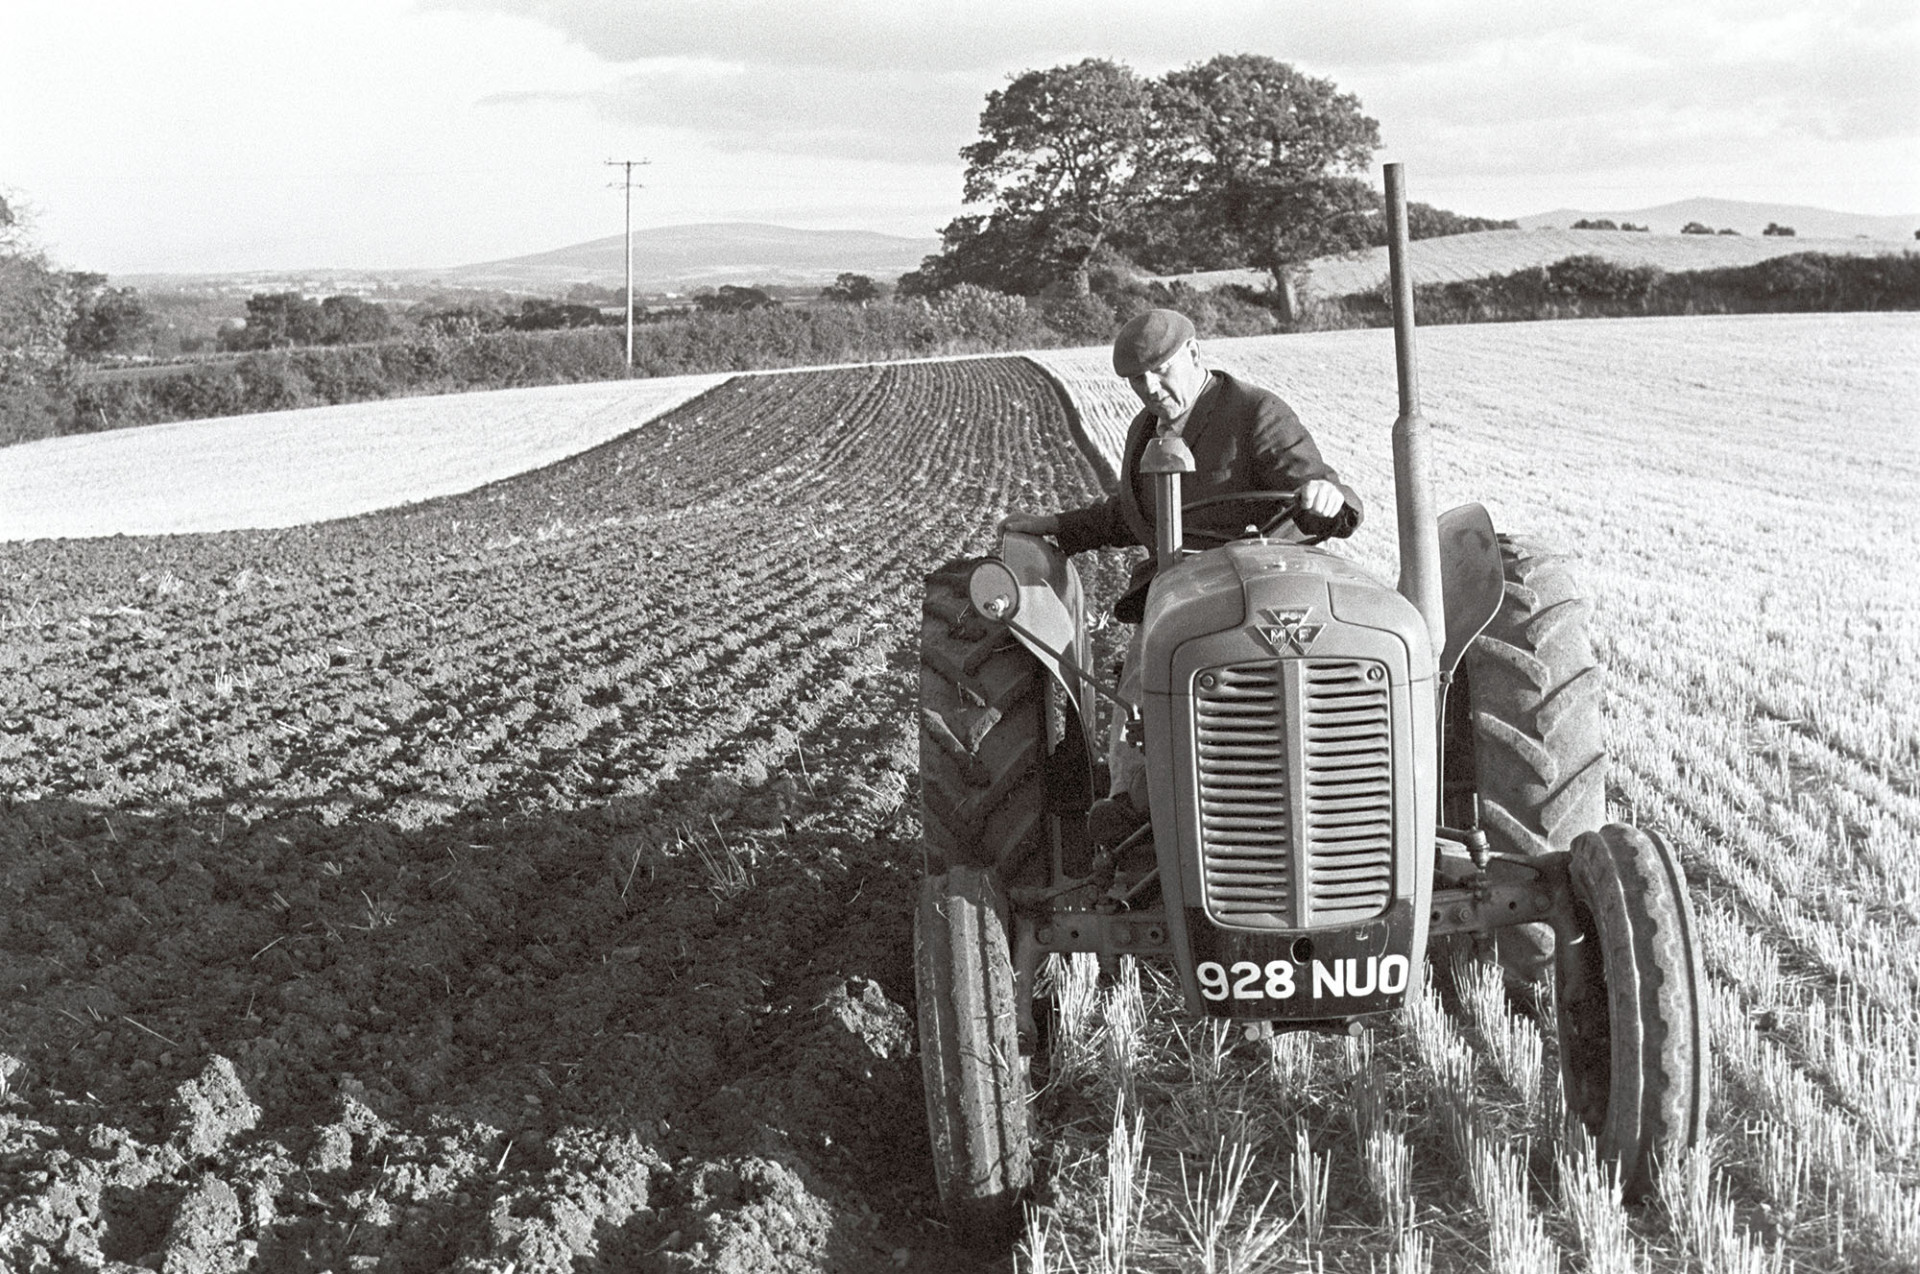 Farmer ploughing field, with Dartmoor in background.
[John Ward on his Massey Ferguson tractor ploughing a field at Parsonage Farm, Iddesleigh. A view of Dartmoor can be seen in the distance.]